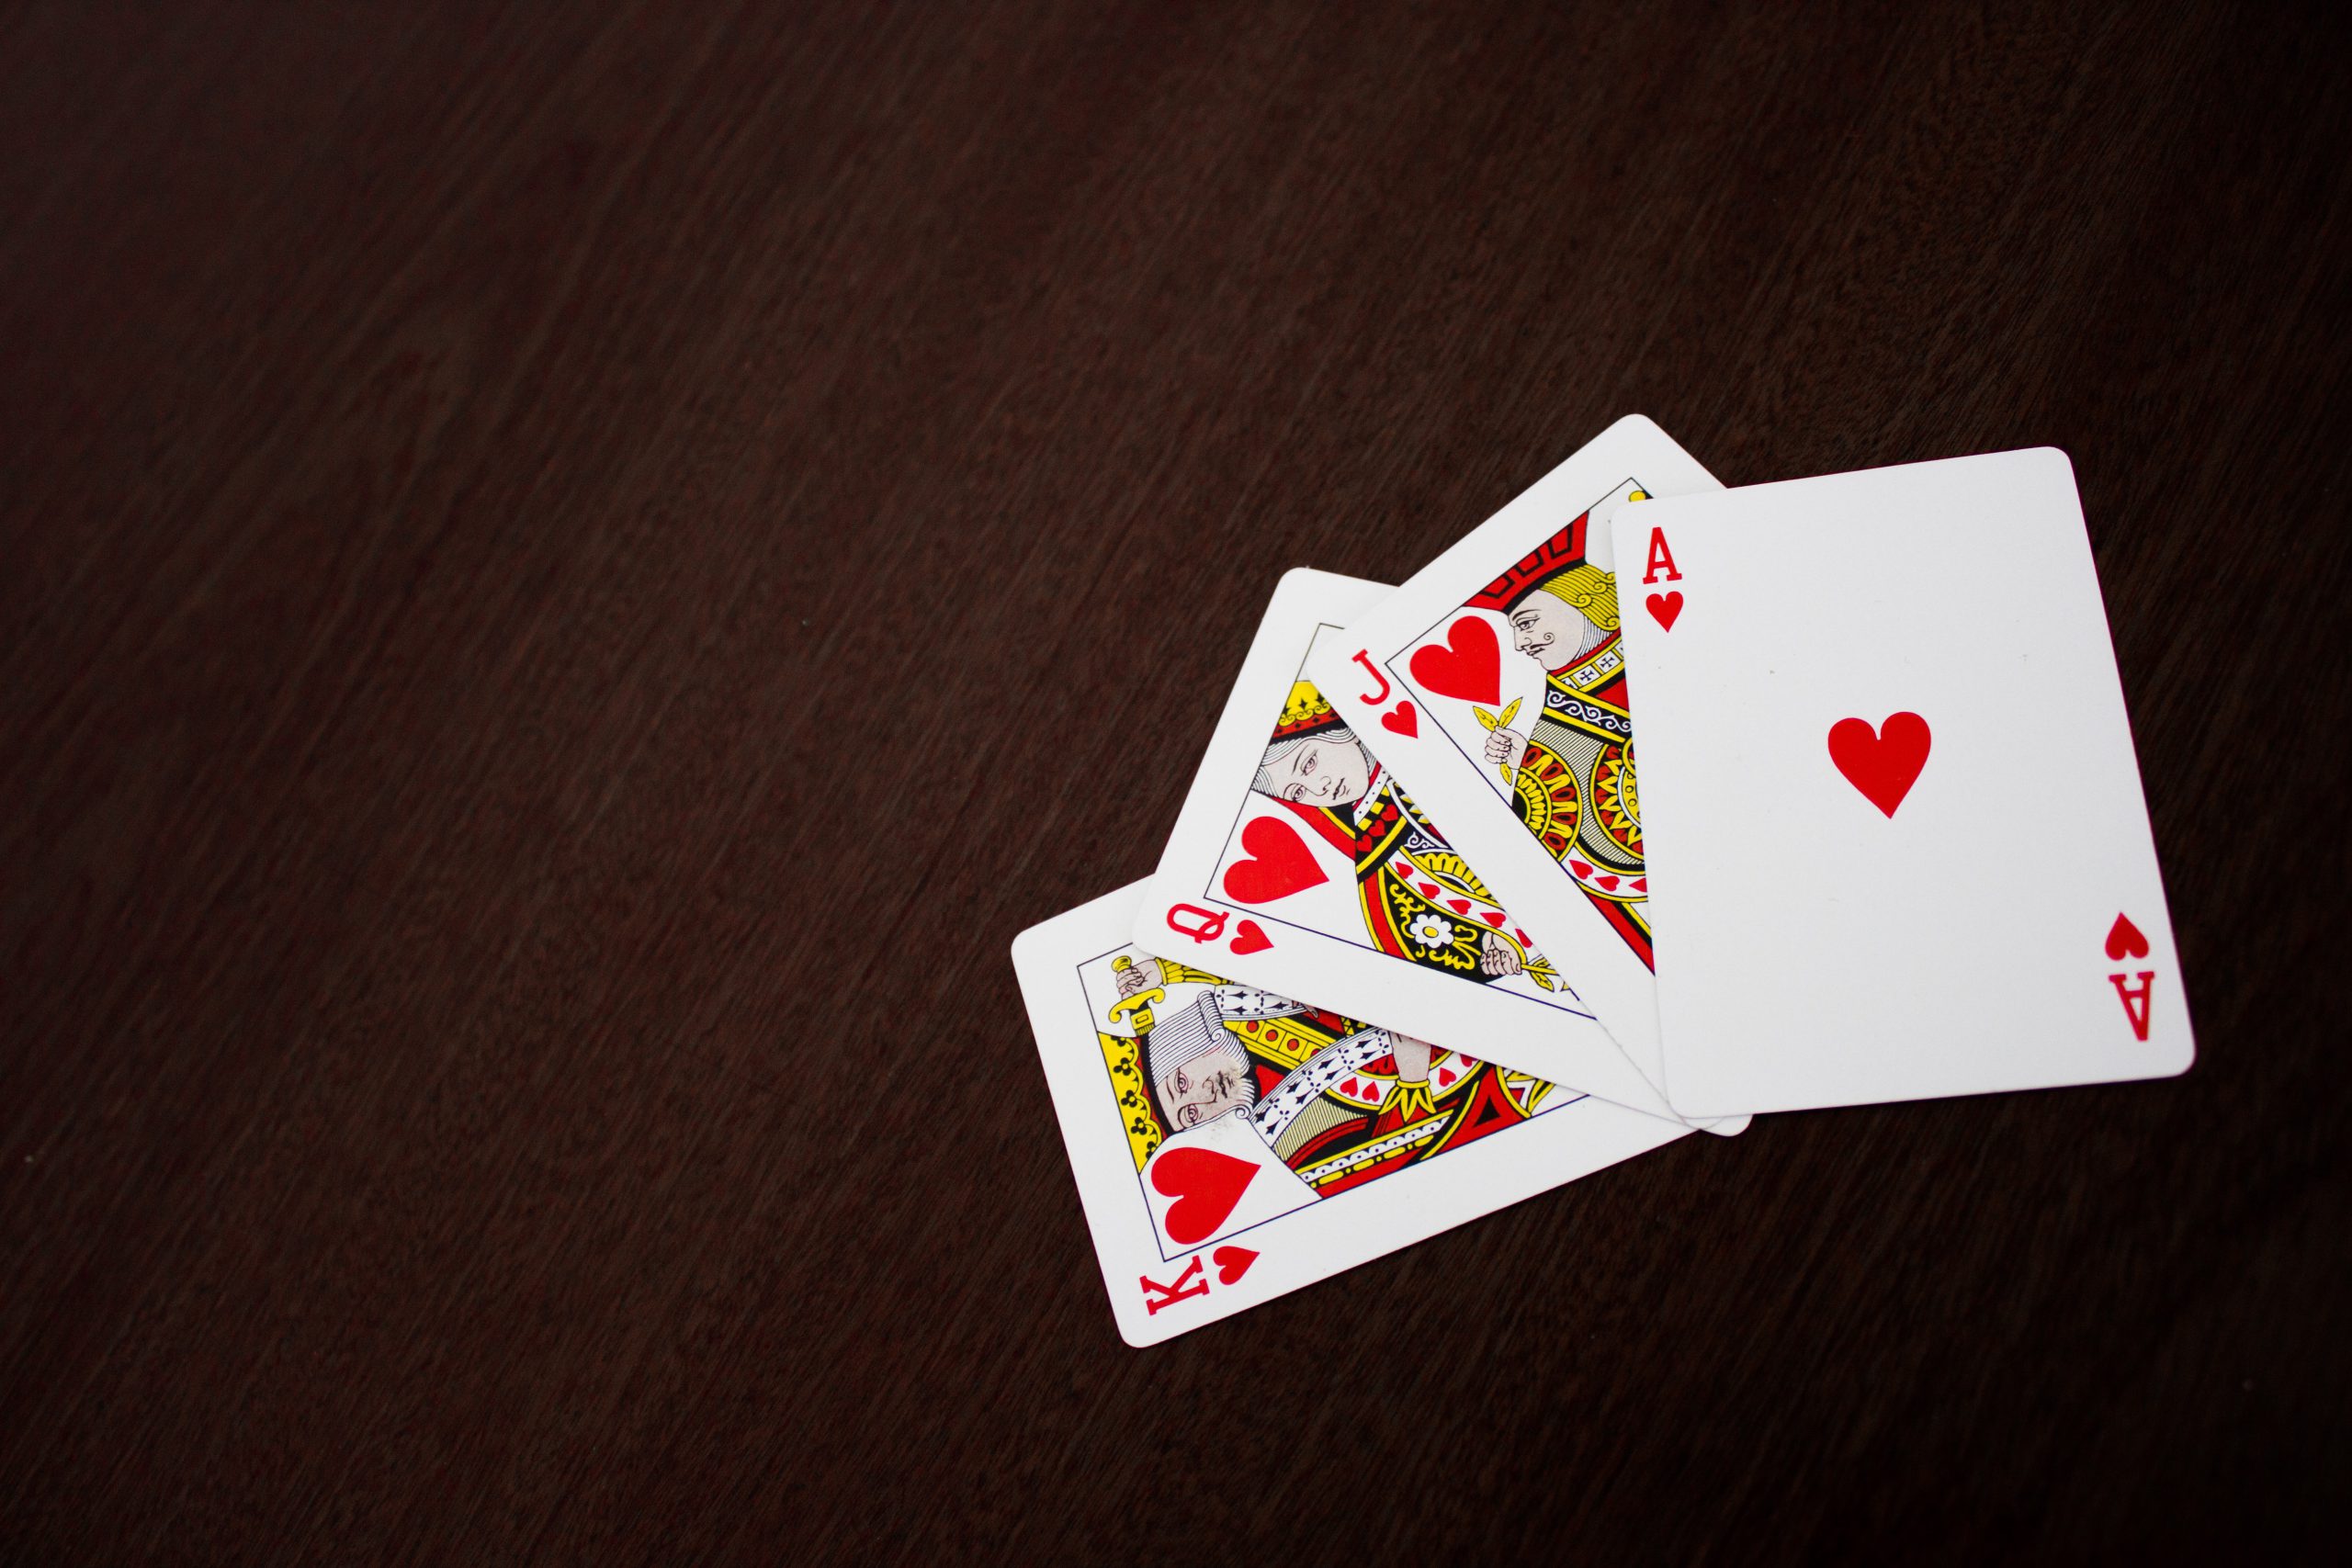 In poker, what exactly is a flush draw?